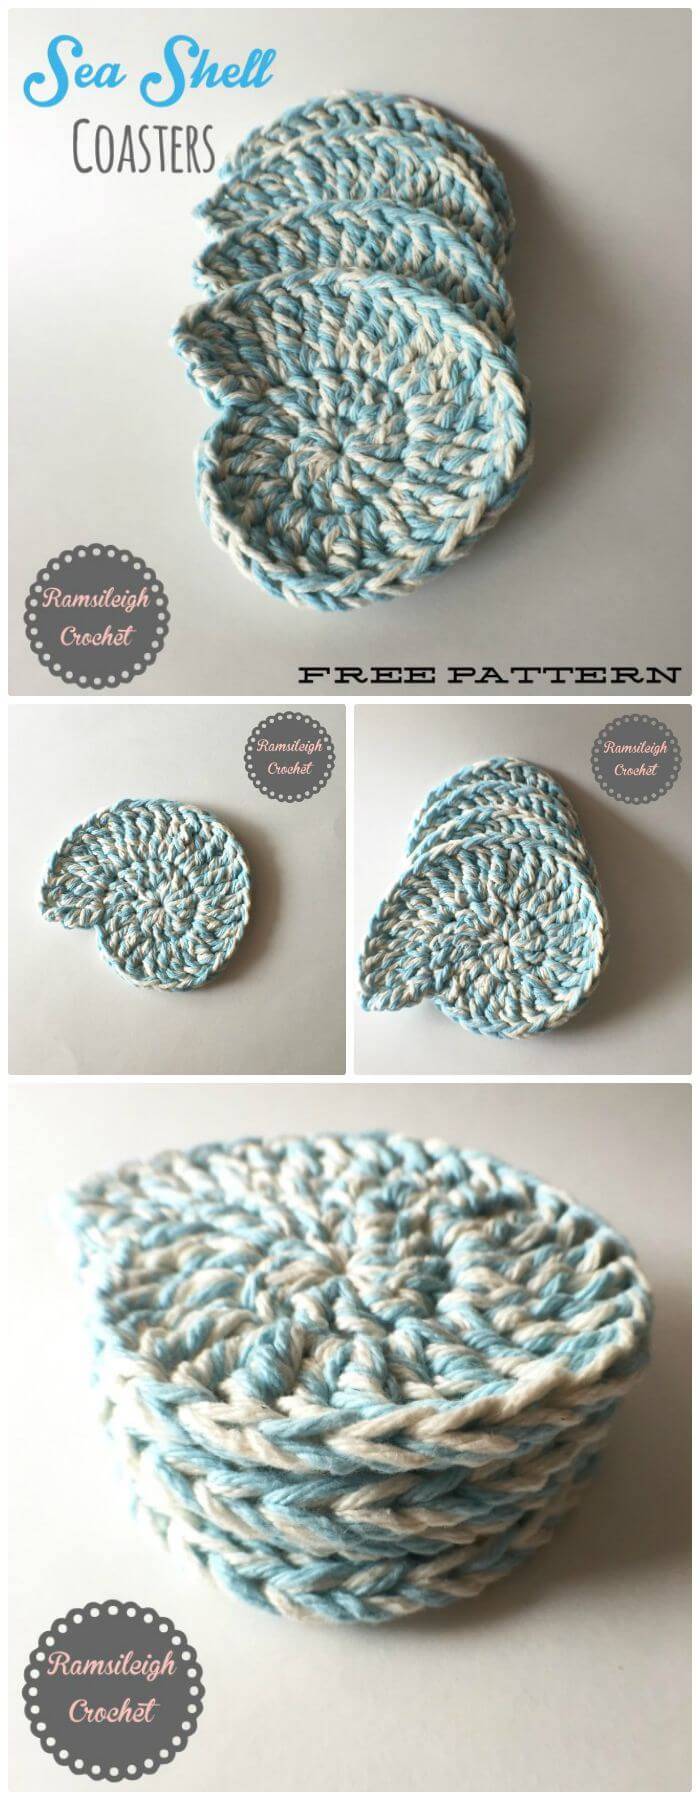 DIY Sea Shell Coasters-Free Crochet Pattern, Quick and easy crochet coasters with complete free patterns! Simple crochet coaster free patterns!